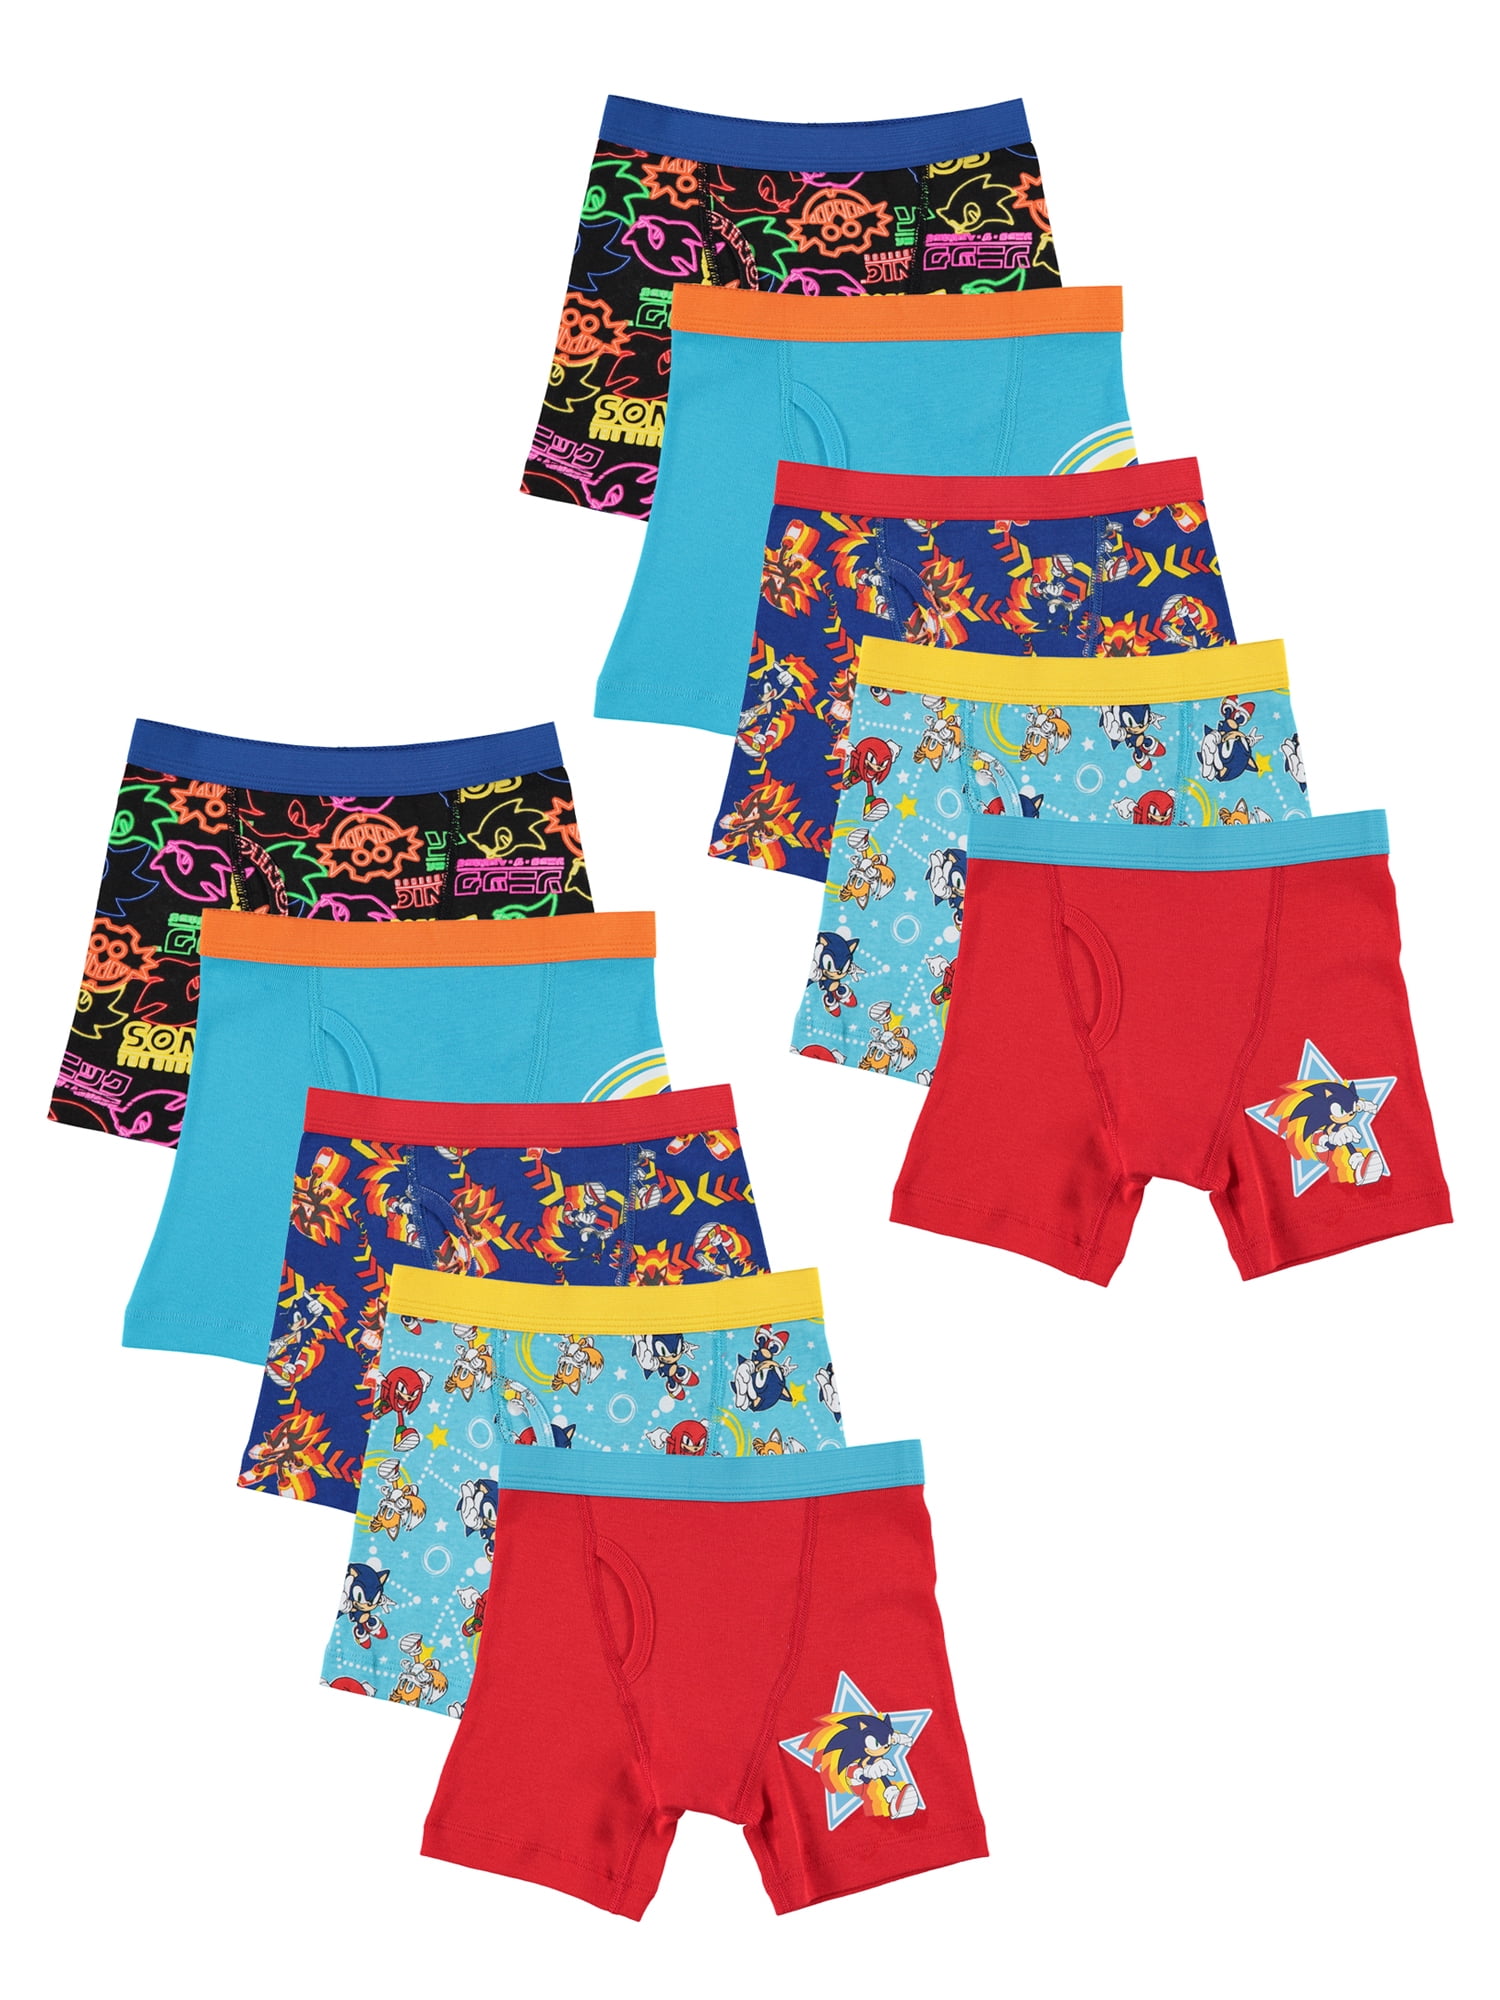 Bluey Girls' 10-Pack of 100% Soft Combed Cotton India